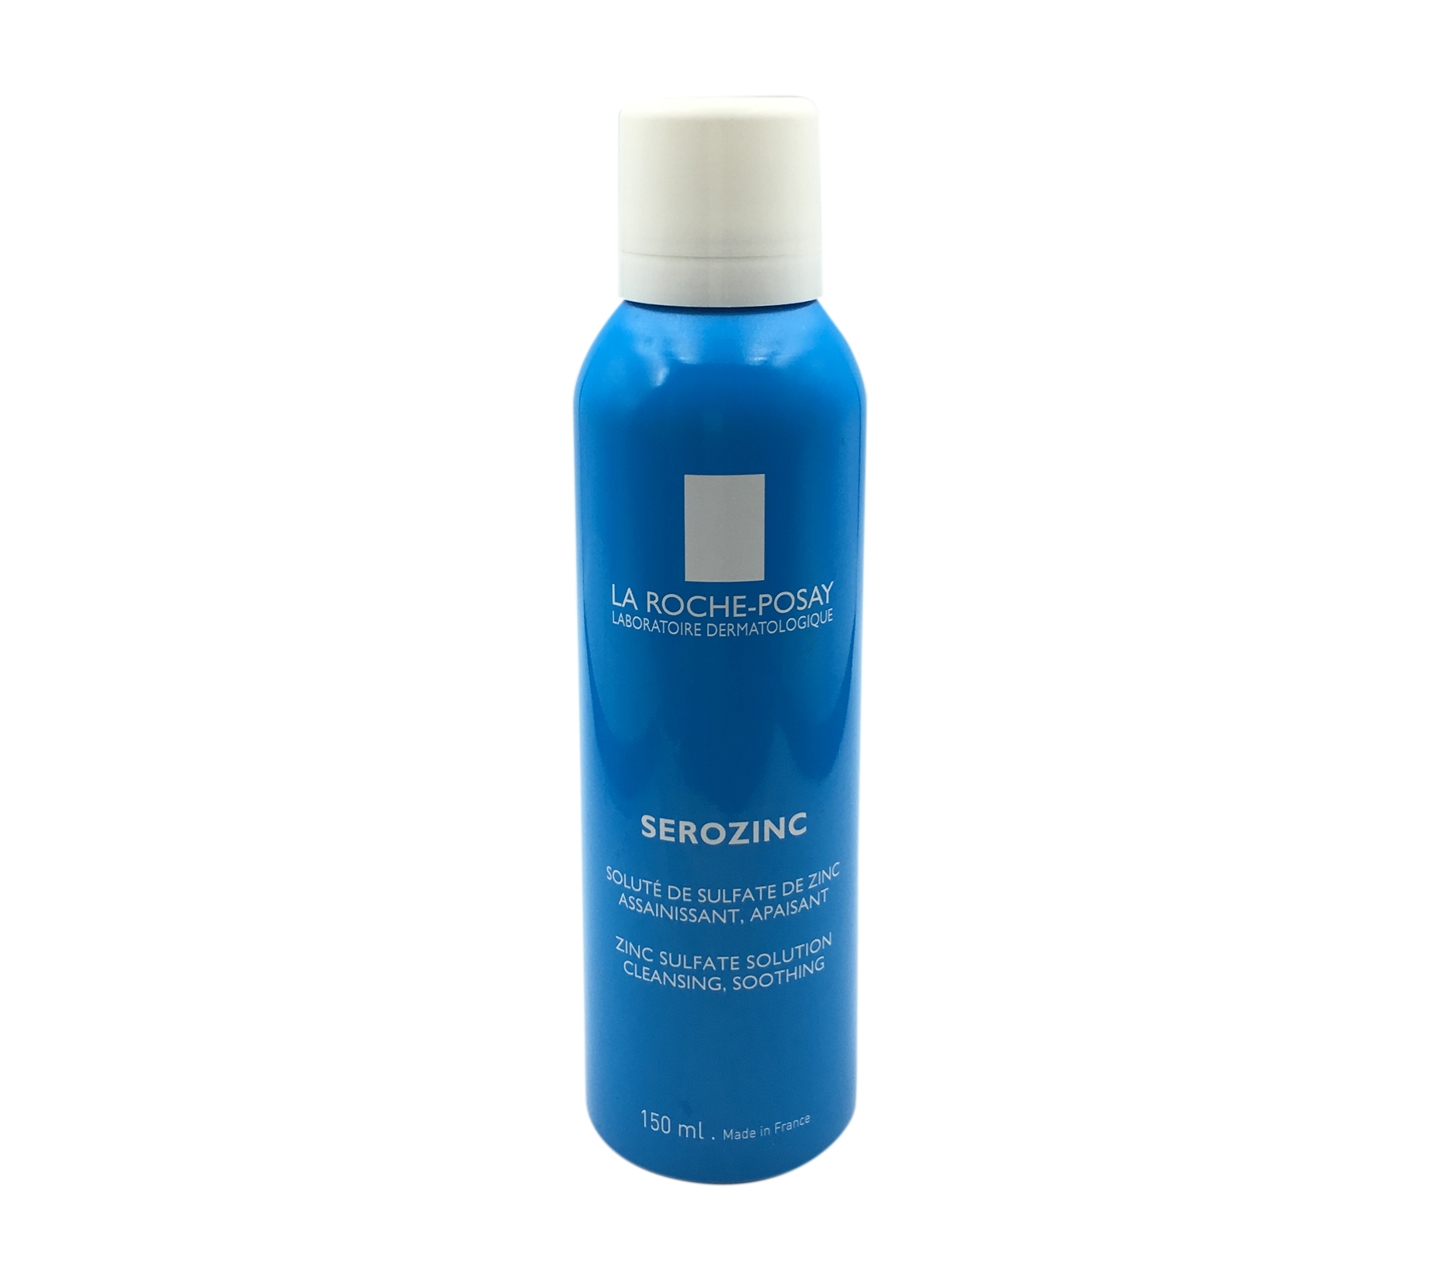 La Roche Posay Serozinc Zinc Sulfate Solution Cleaning , Soothing Faces